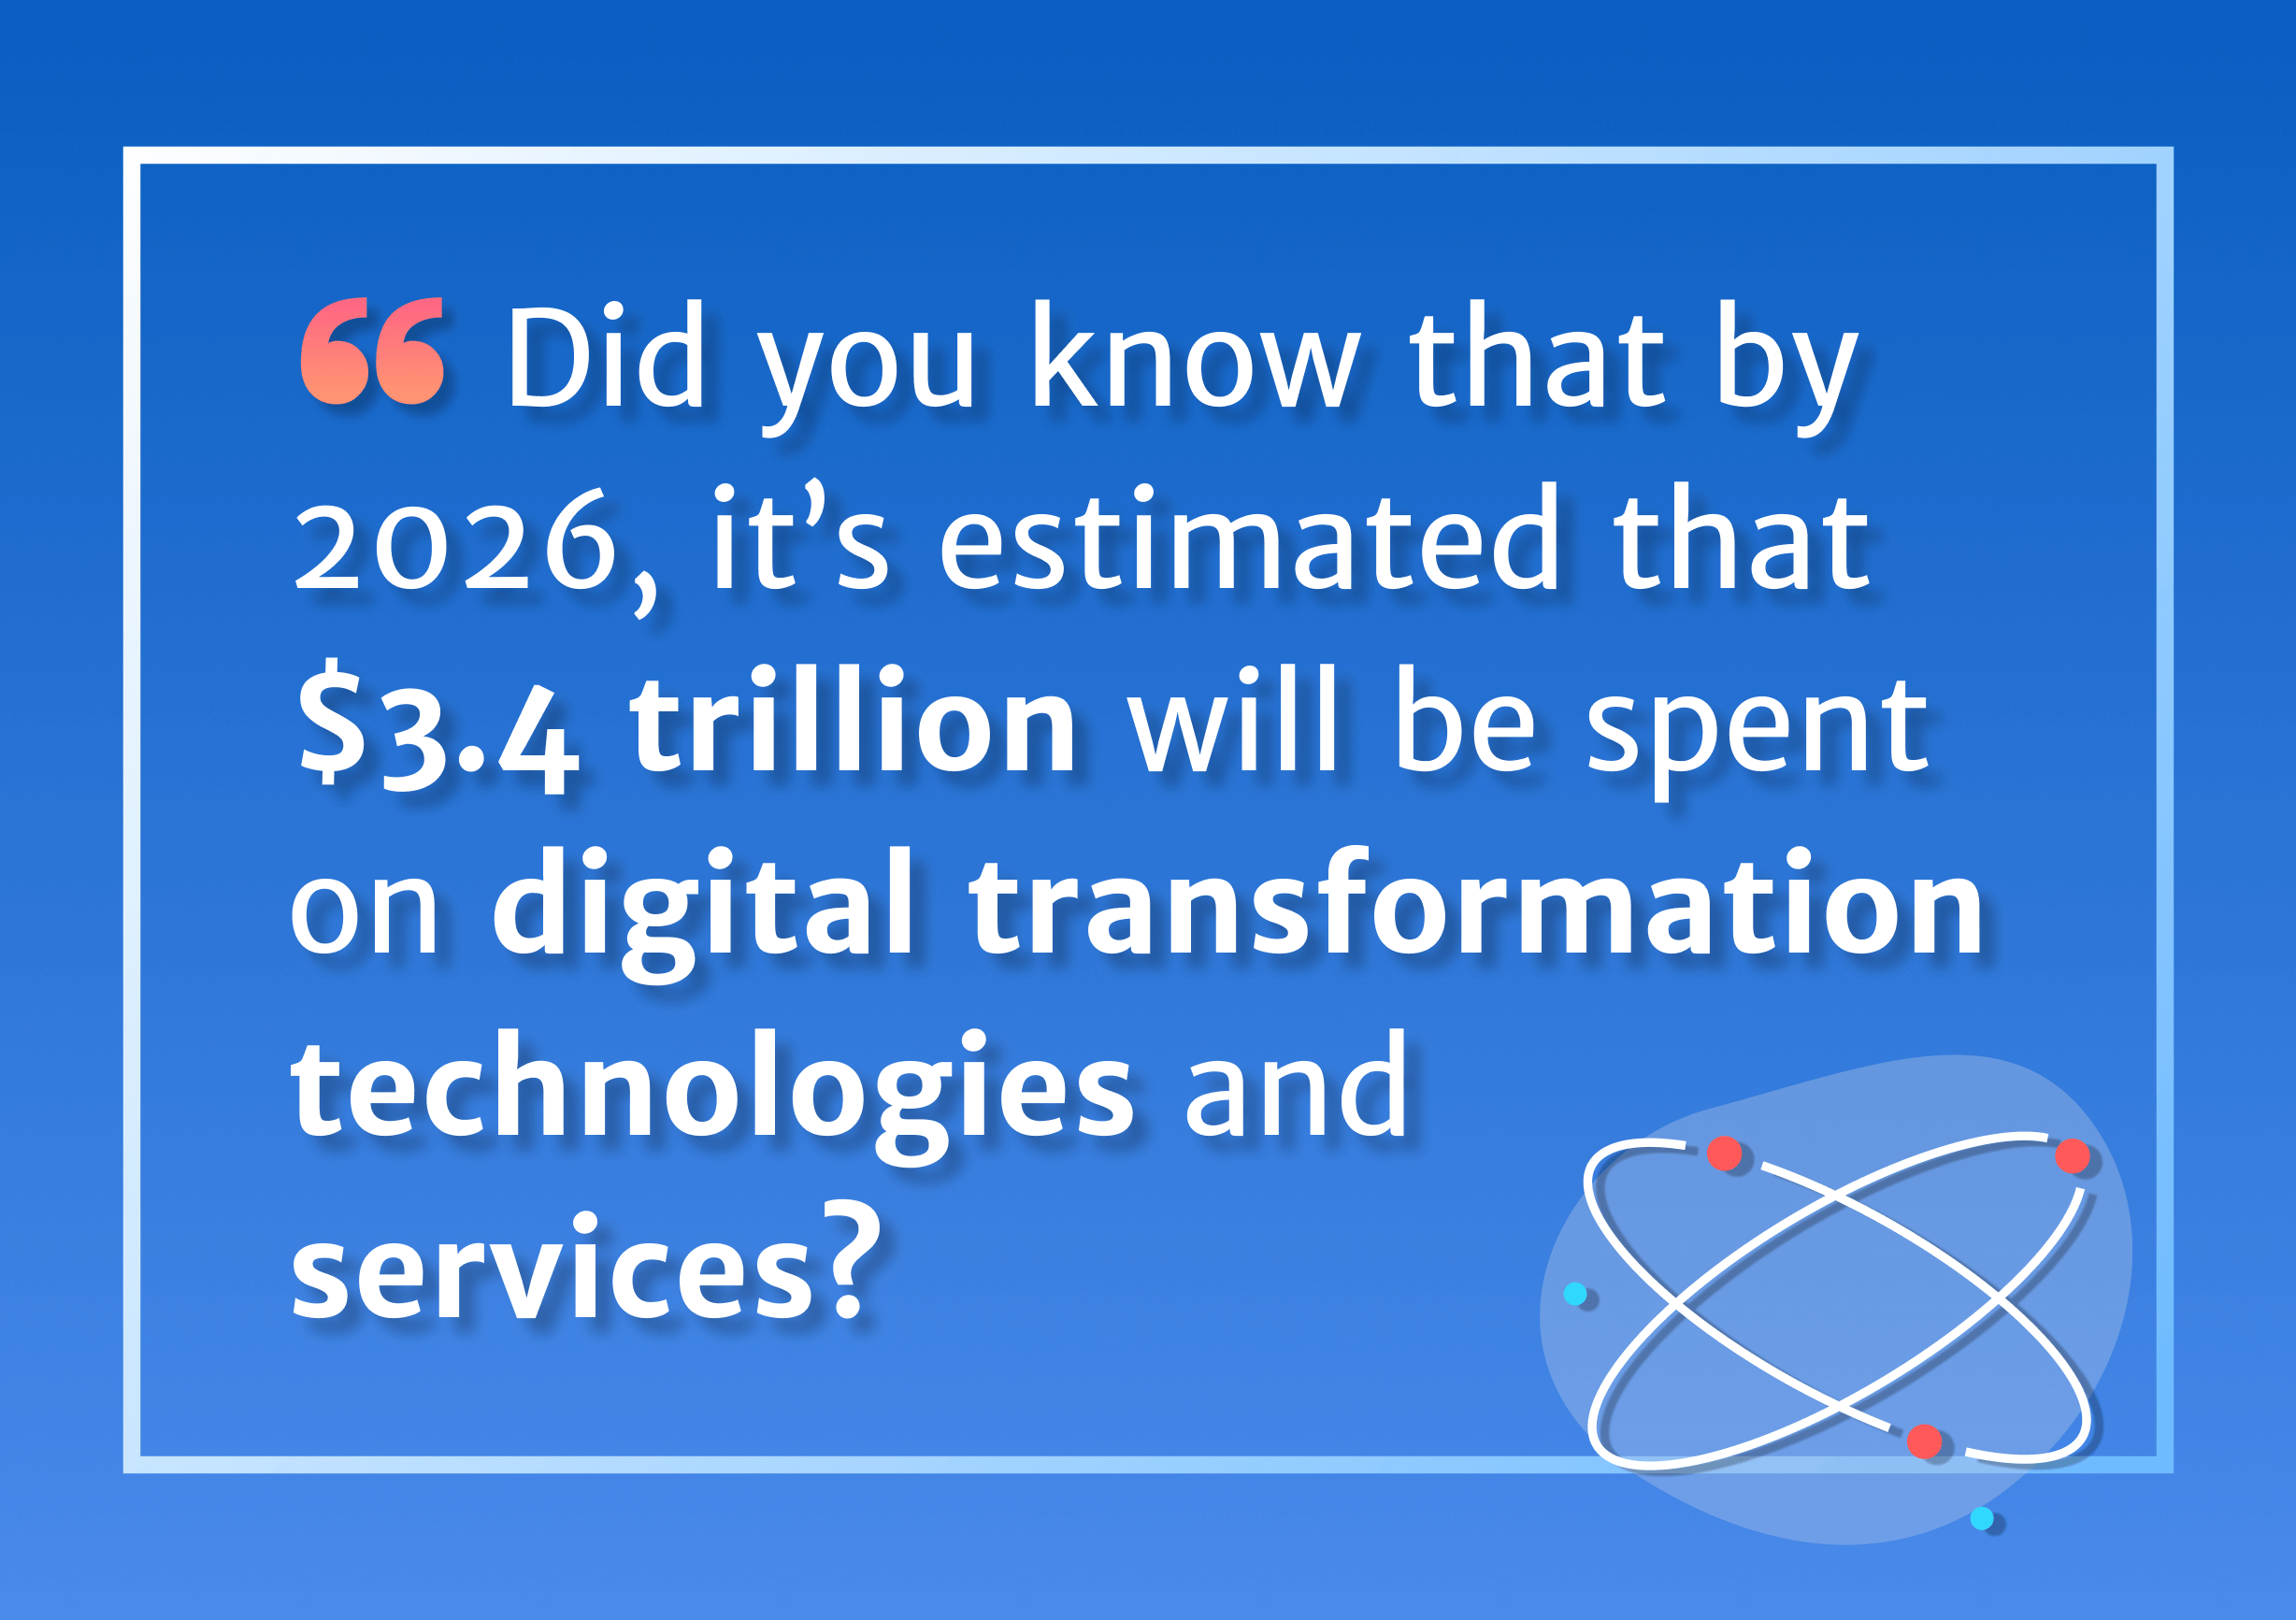 did you know that by 2026, it’s estimated that $3.4 trillion will be spent on digital transformation technologies and services